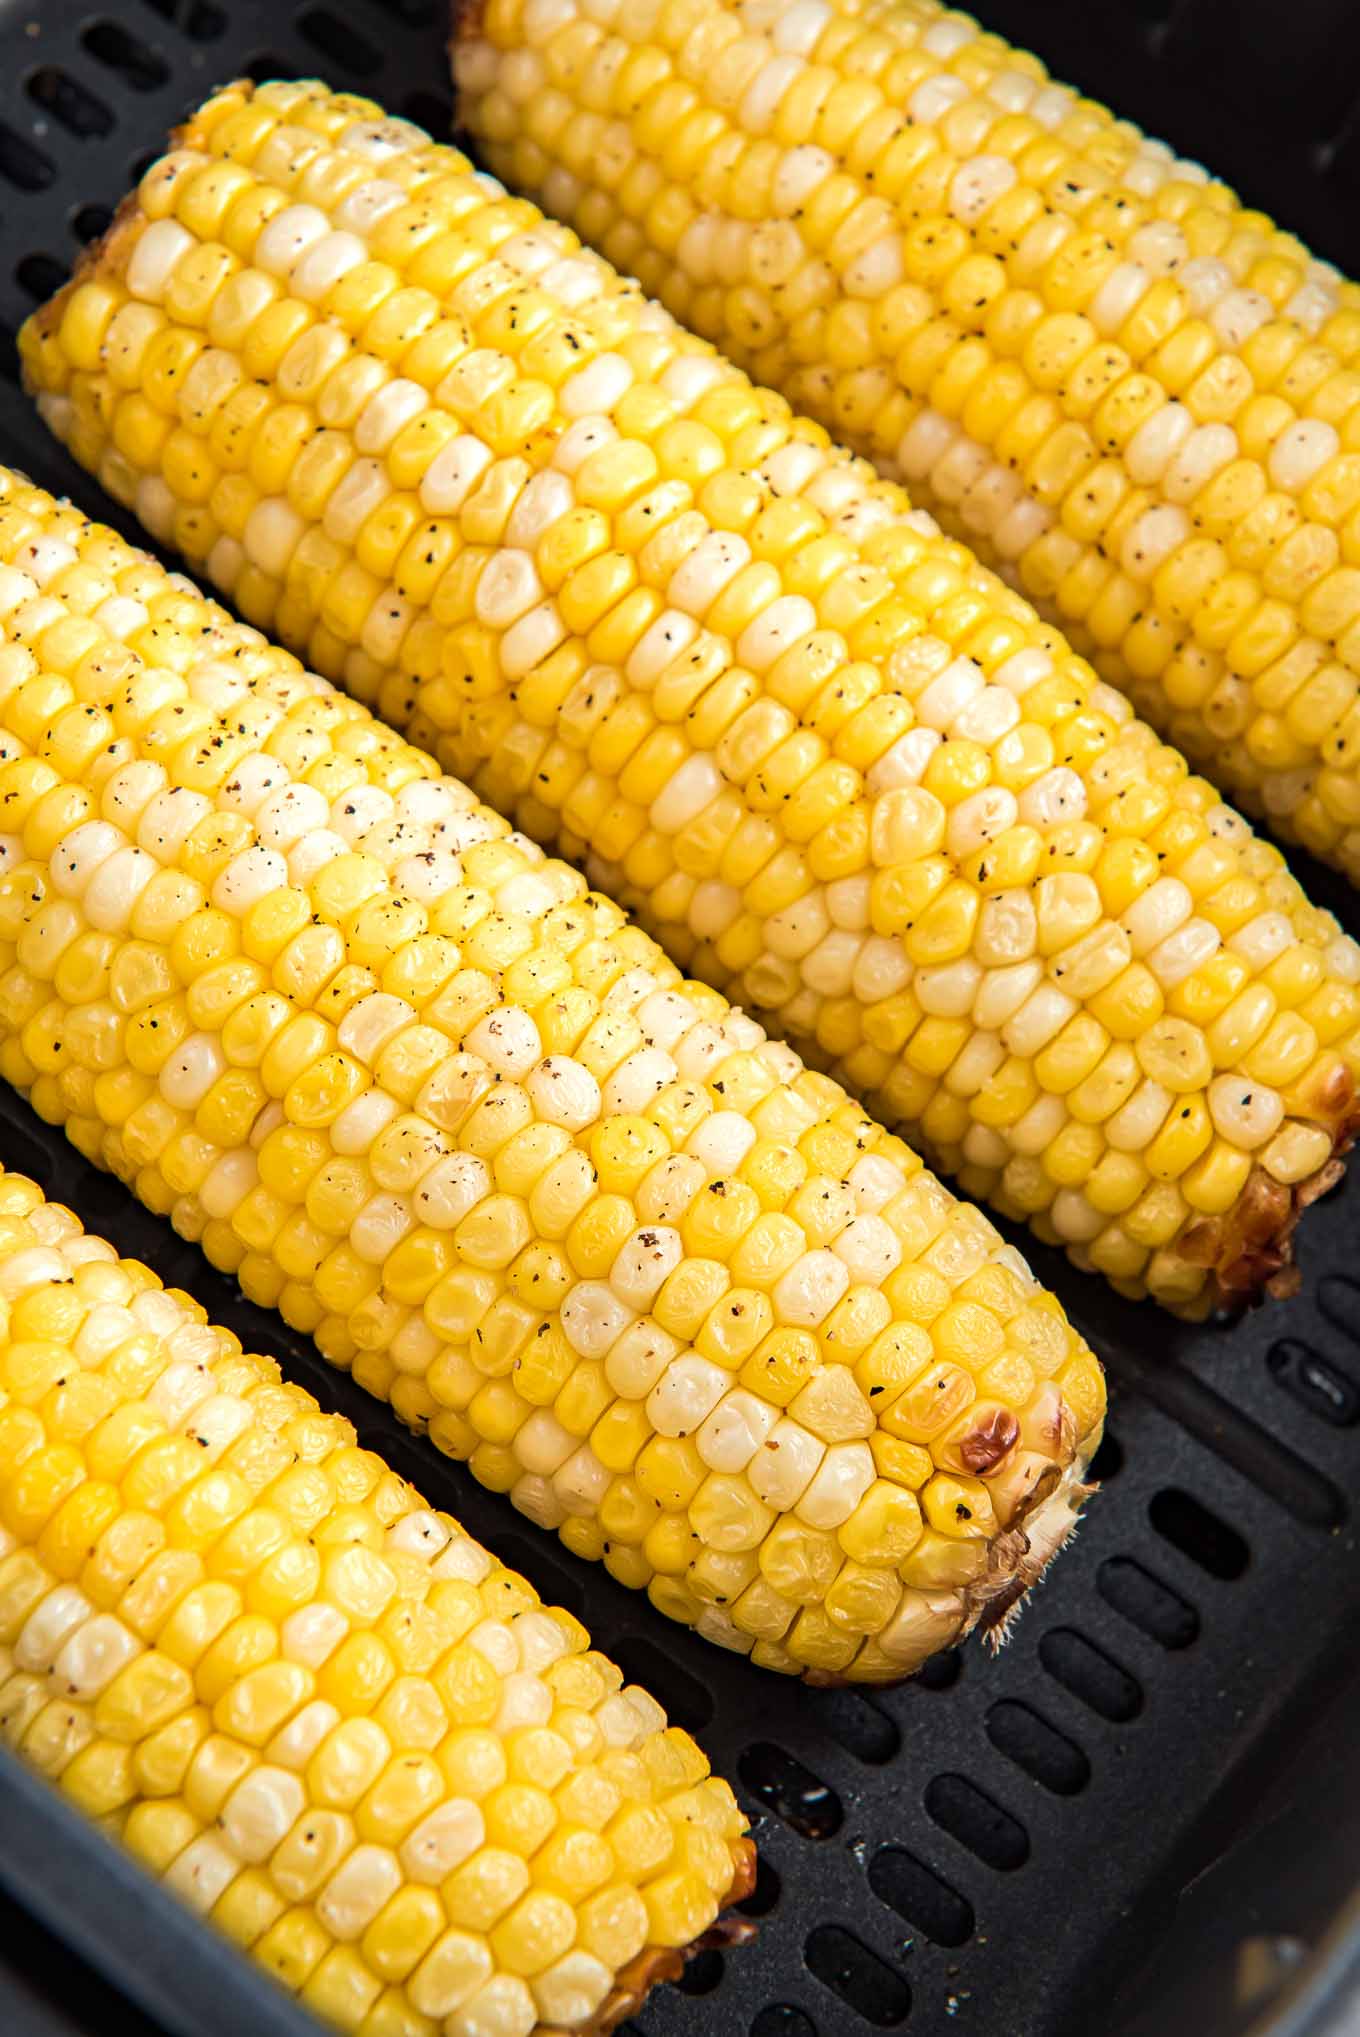 Cooked corn on the cob lightly seasoned with black pepper in the air fryer basket.